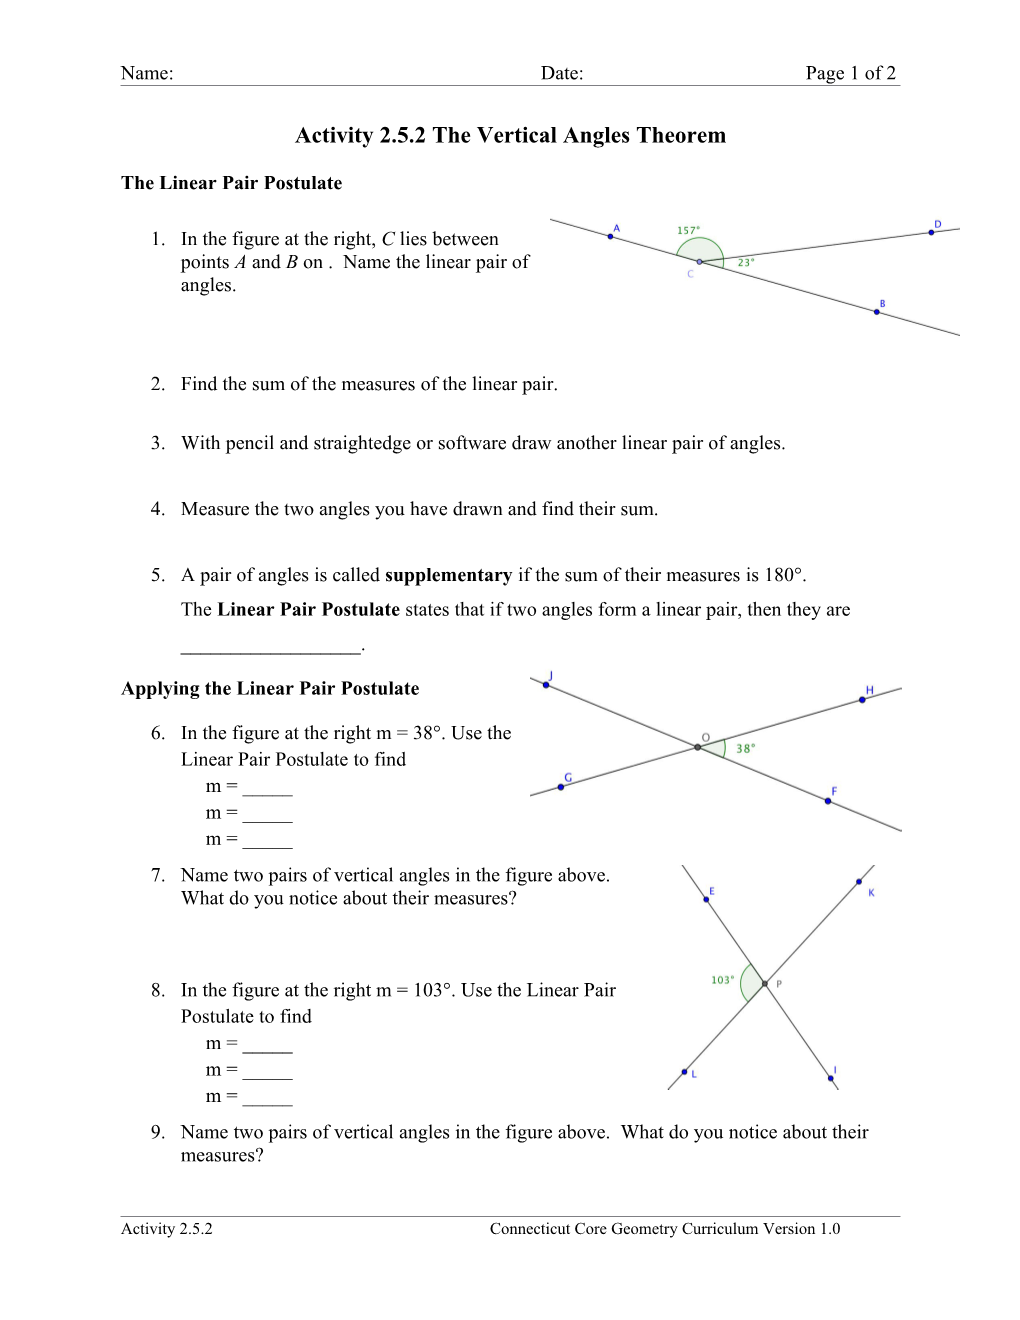 Activity 2.5.2 the Vertical Angles Theorem